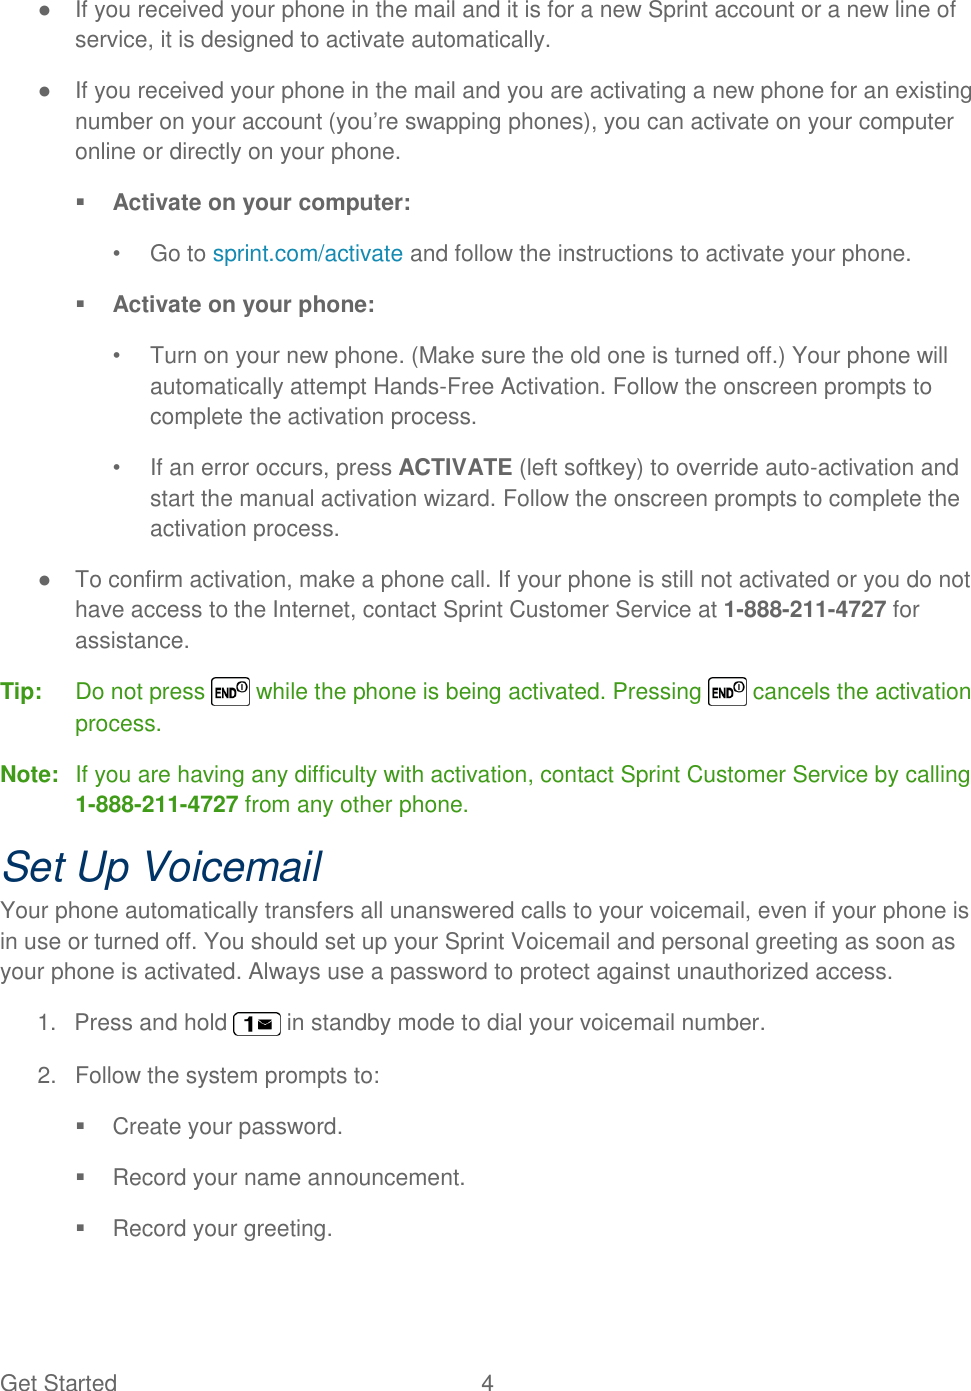 Get Started  4 ●  If you received your phone in the mail and it is for a new Sprint account or a new line of service, it is designed to activate automatically. ●  If you received your phone in the mail and you are activating a new phone for an existing number on your account (you‘re swapping phones), you can activate on your computer online or directly on your phone.  Activate on your computer: •  Go to sprint.com/activate and follow the instructions to activate your phone.  Activate on your phone: •  Turn on your new phone. (Make sure the old one is turned off.) Your phone will automatically attempt Hands-Free Activation. Follow the onscreen prompts to complete the activation process. •  If an error occurs, press ACTIVATE (left softkey) to override auto-activation and start the manual activation wizard. Follow the onscreen prompts to complete the activation process. ●  To confirm activation, make a phone call. If your phone is still not activated or you do not have access to the Internet, contact Sprint Customer Service at 1-888-211-4727 for assistance. Tip:  Do not press   while the phone is being activated. Pressing   cancels the activation process. Note:  If you are having any difficulty with activation, contact Sprint Customer Service by calling 1-888-211-4727 from any other phone. Set Up Voicemail Your phone automatically transfers all unanswered calls to your voicemail, even if your phone is in use or turned off. You should set up your Sprint Voicemail and personal greeting as soon as your phone is activated. Always use a password to protect against unauthorized access. 1.  Press and hold   in standby mode to dial your voicemail number. 2.  Follow the system prompts to:   Create your password.   Record your name announcement.   Record your greeting. 